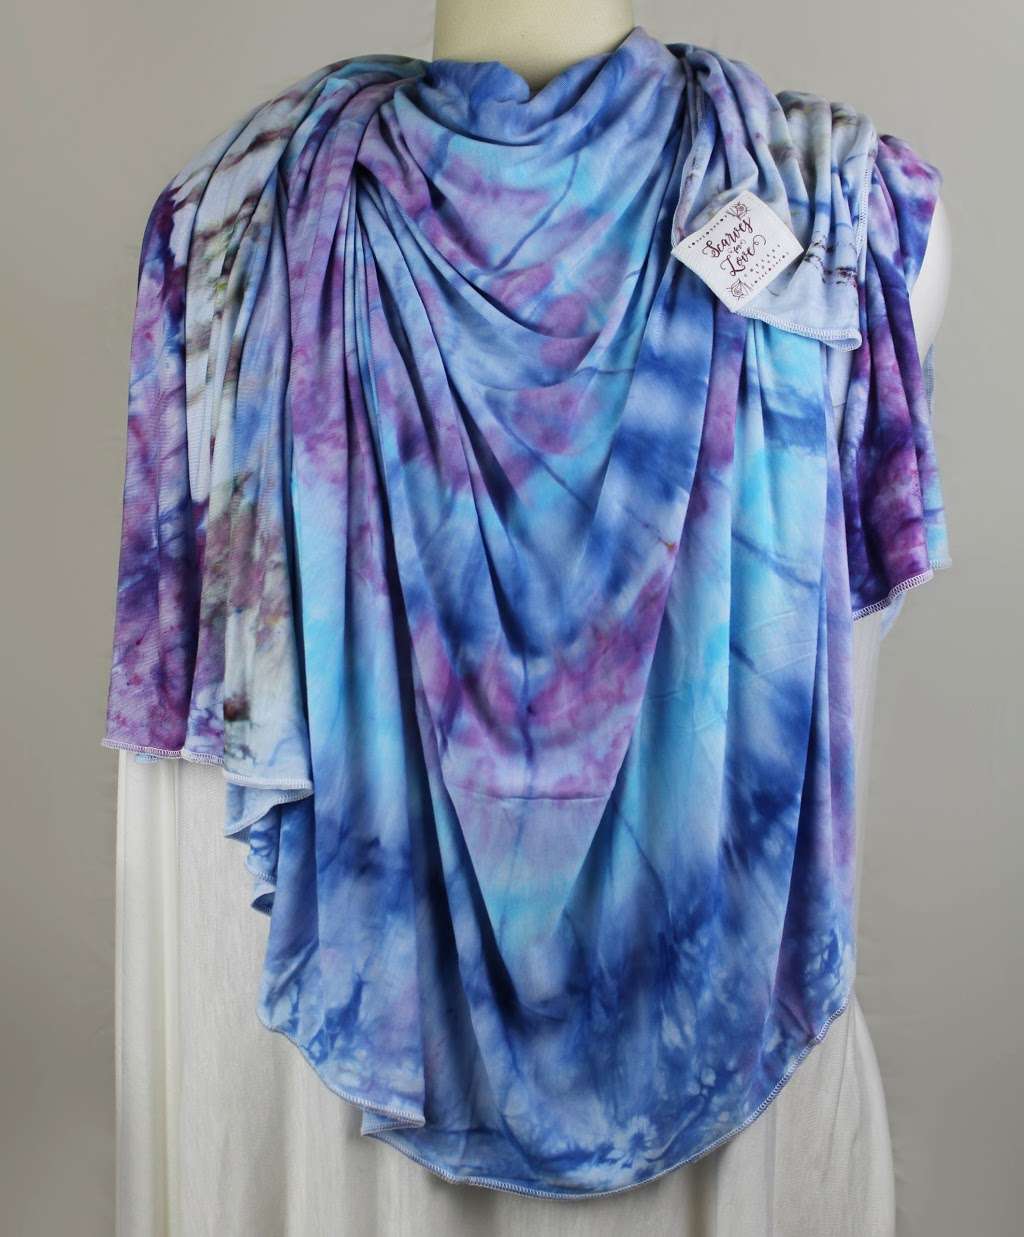 Scarves for Love | 7360 Curry Ford Rd #720301, Orlando, FL 32872, USA